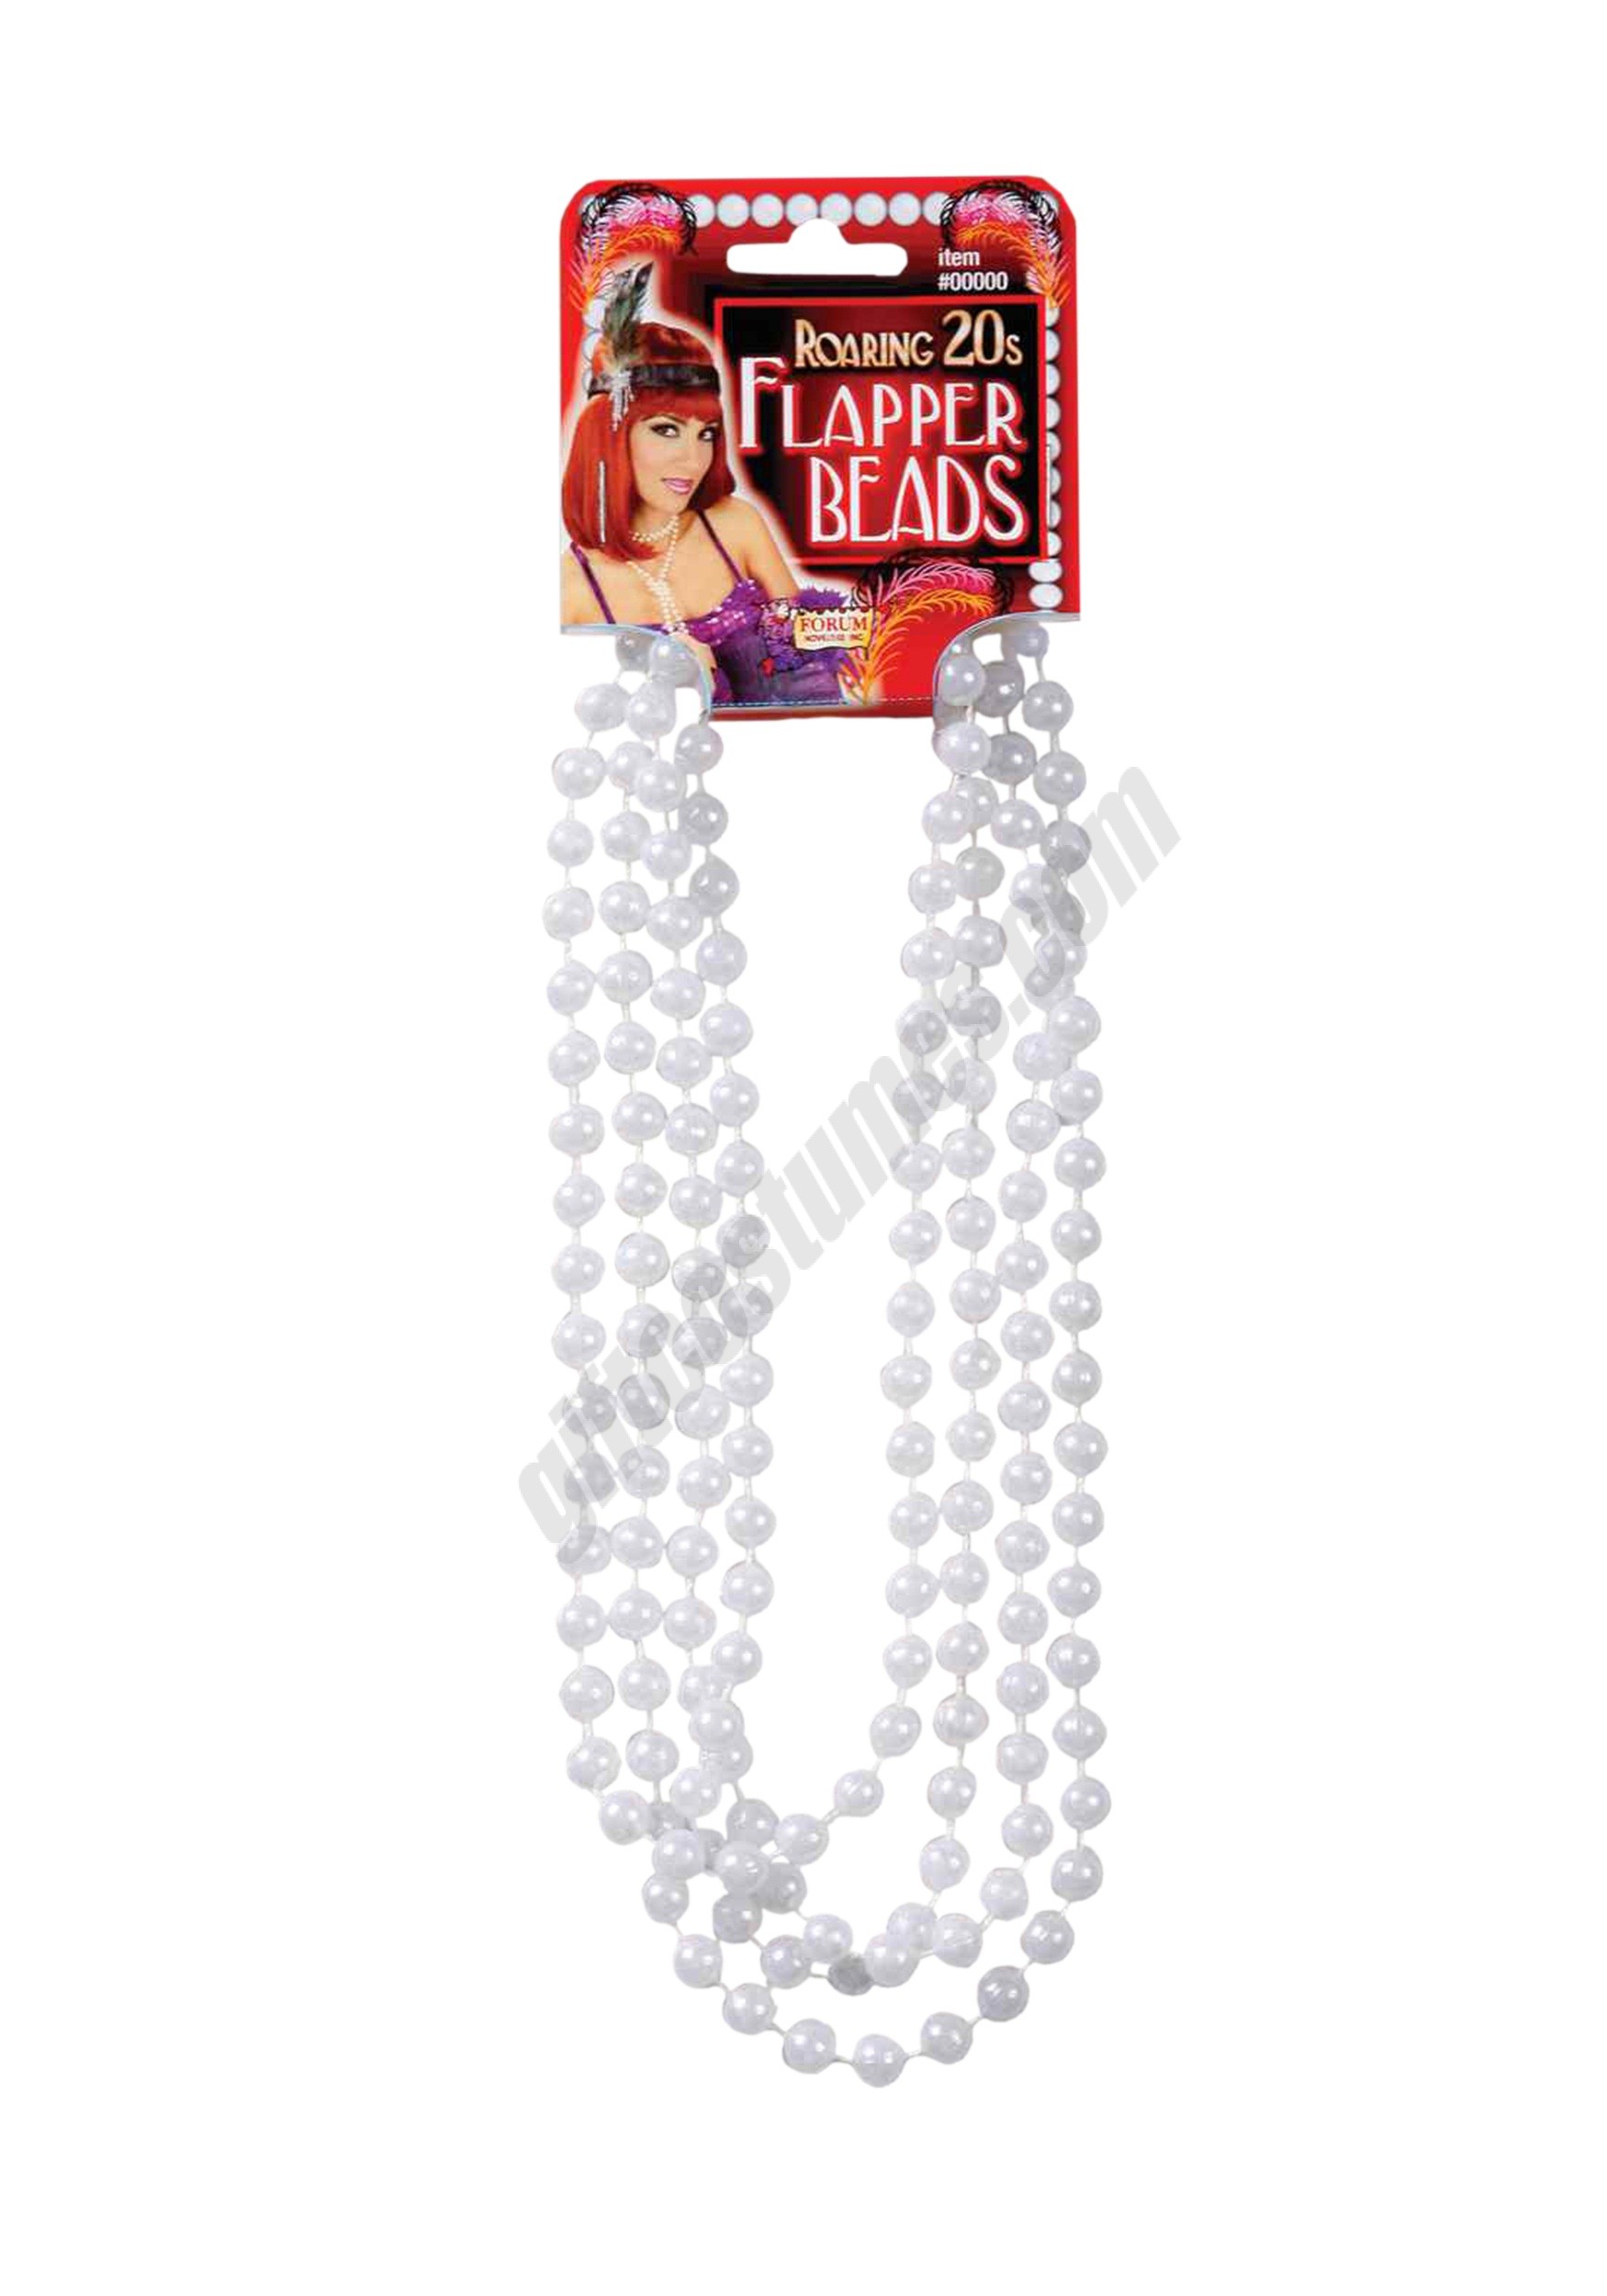 Flapper Pearl Necklace Promotions - Flapper Pearl Necklace Promotions